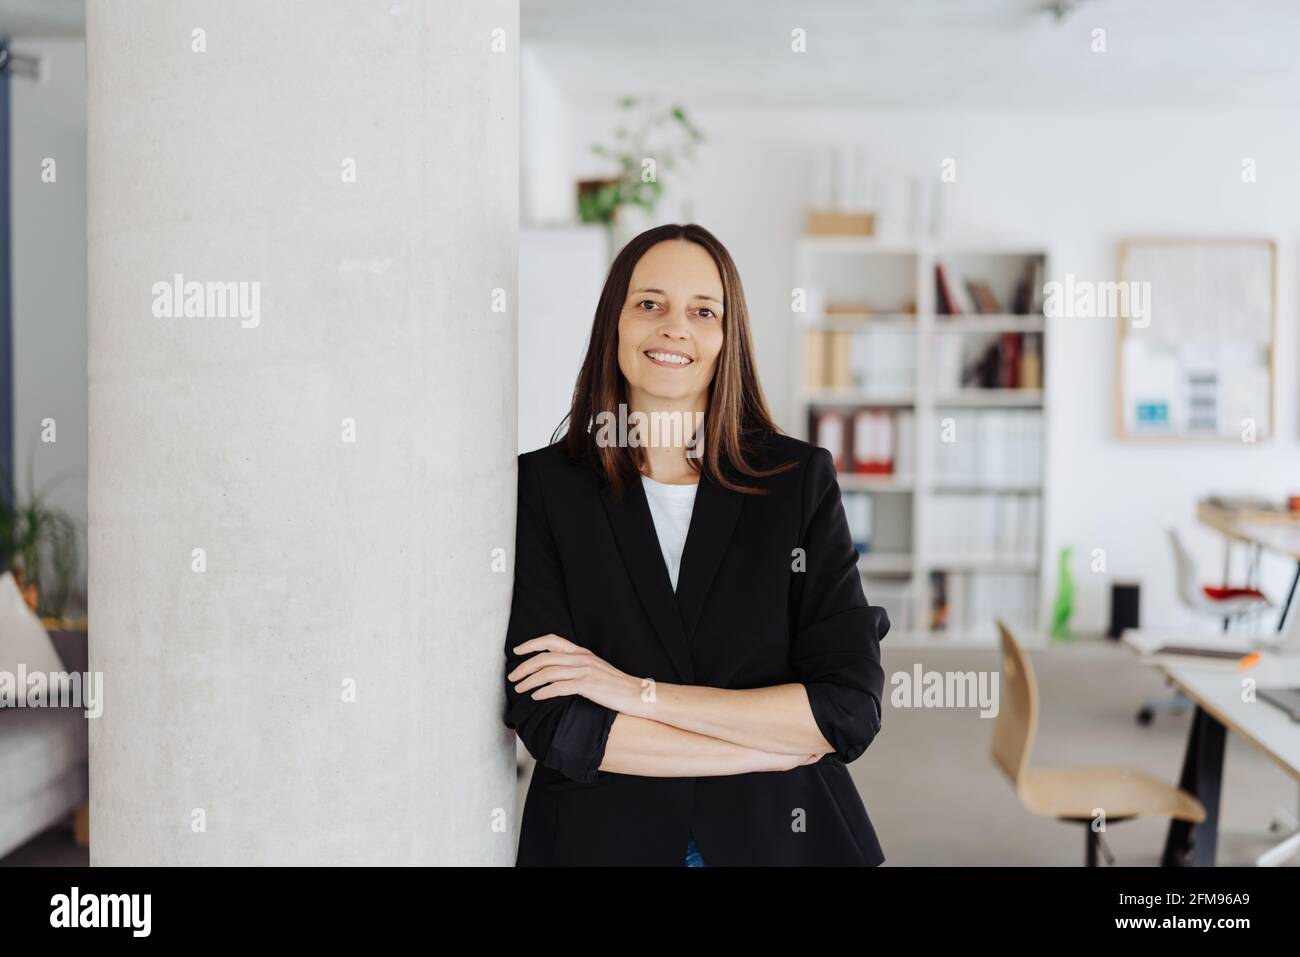 Relaxed businesswoman leaning on a pillar inside the office looking at the camera with a friendly smile and folded arms with copyspace on the side Stock Photo